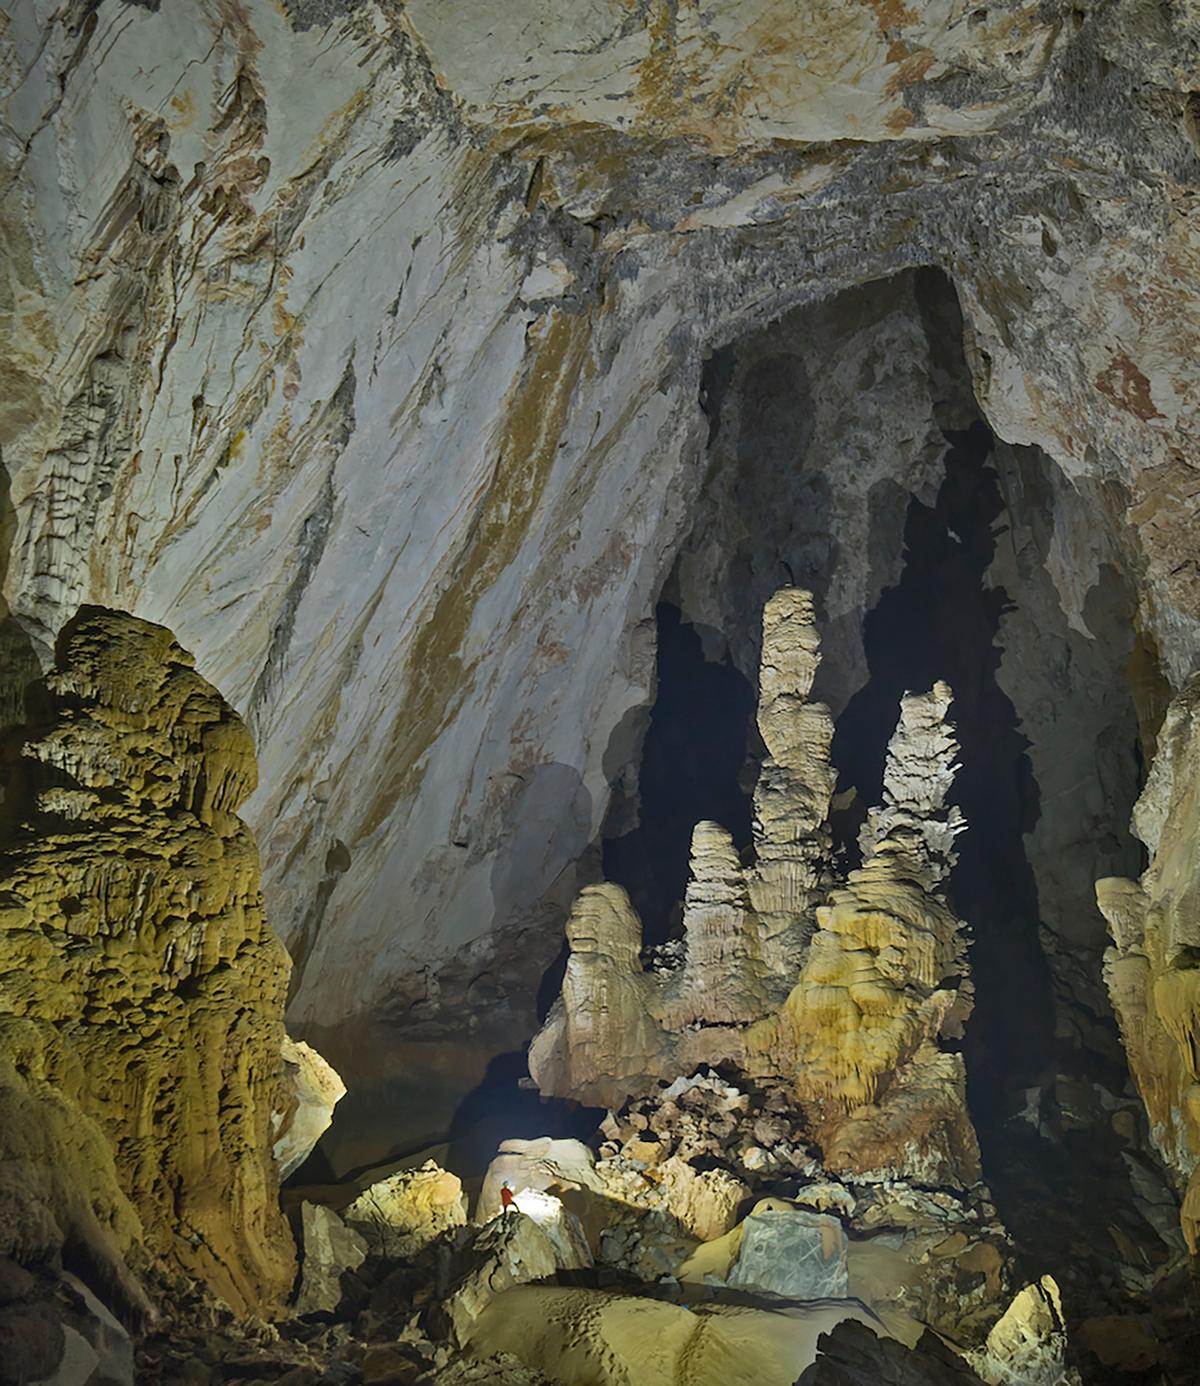 Giant stalagmites inside Son Doong cave. (<a href="https://commons.wikimedia.org/wiki/File:Son_Doong_Cave_DB_(1).jpg">Dave Bunnell</a>/CC BY-SA 4.0)